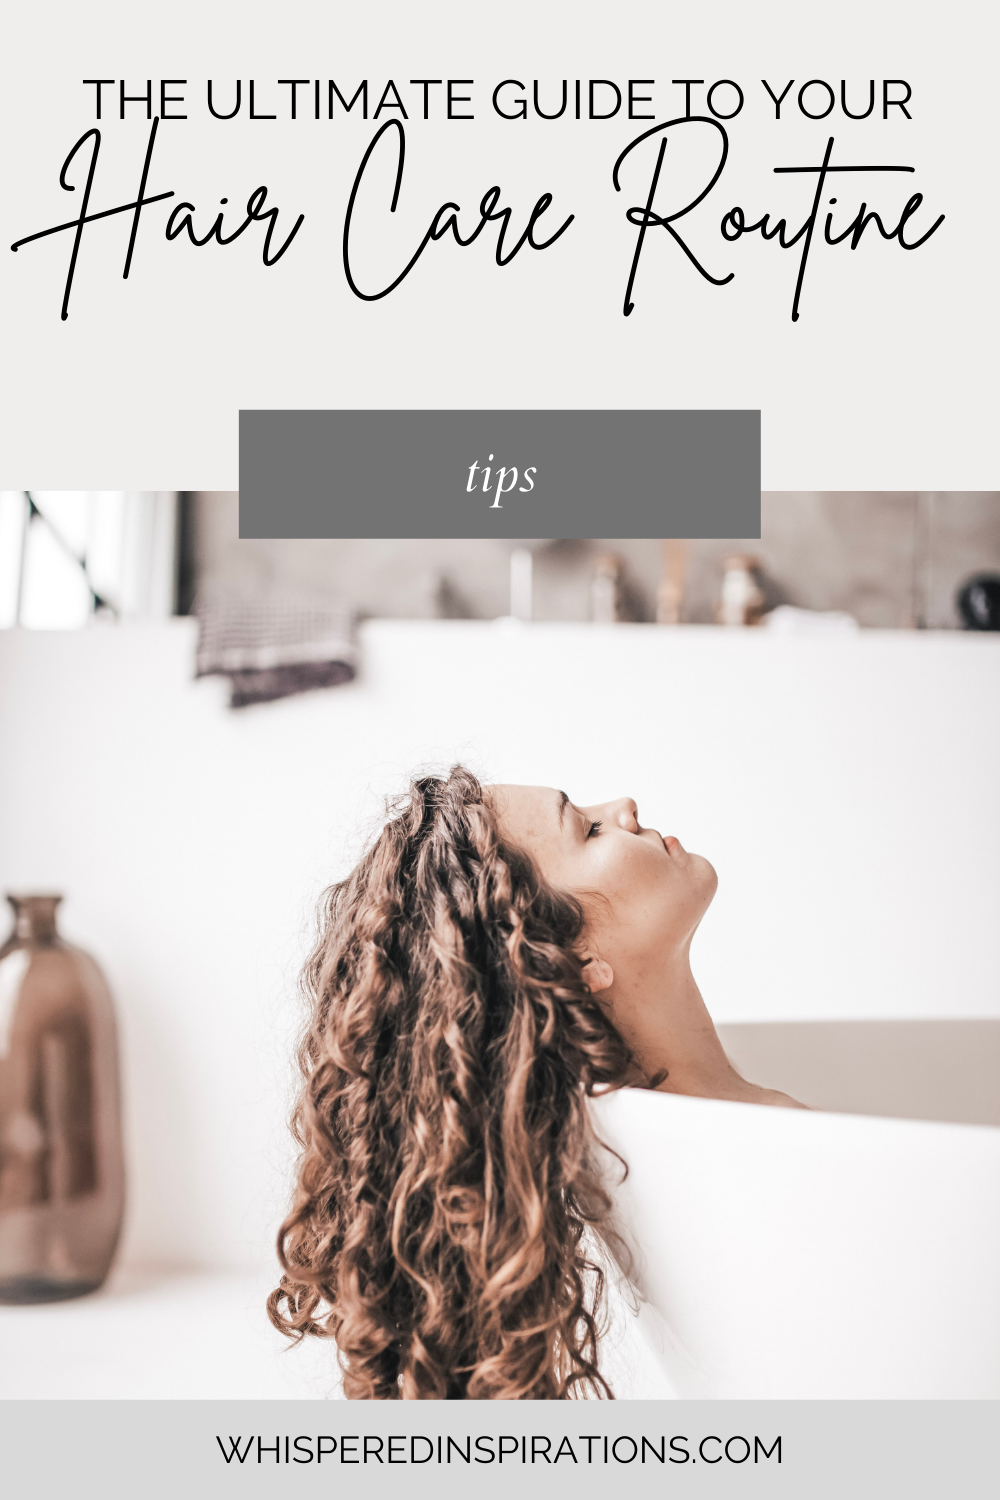 The Ultimate Guide to Your Hair Care Routine - Whispered Inspirations